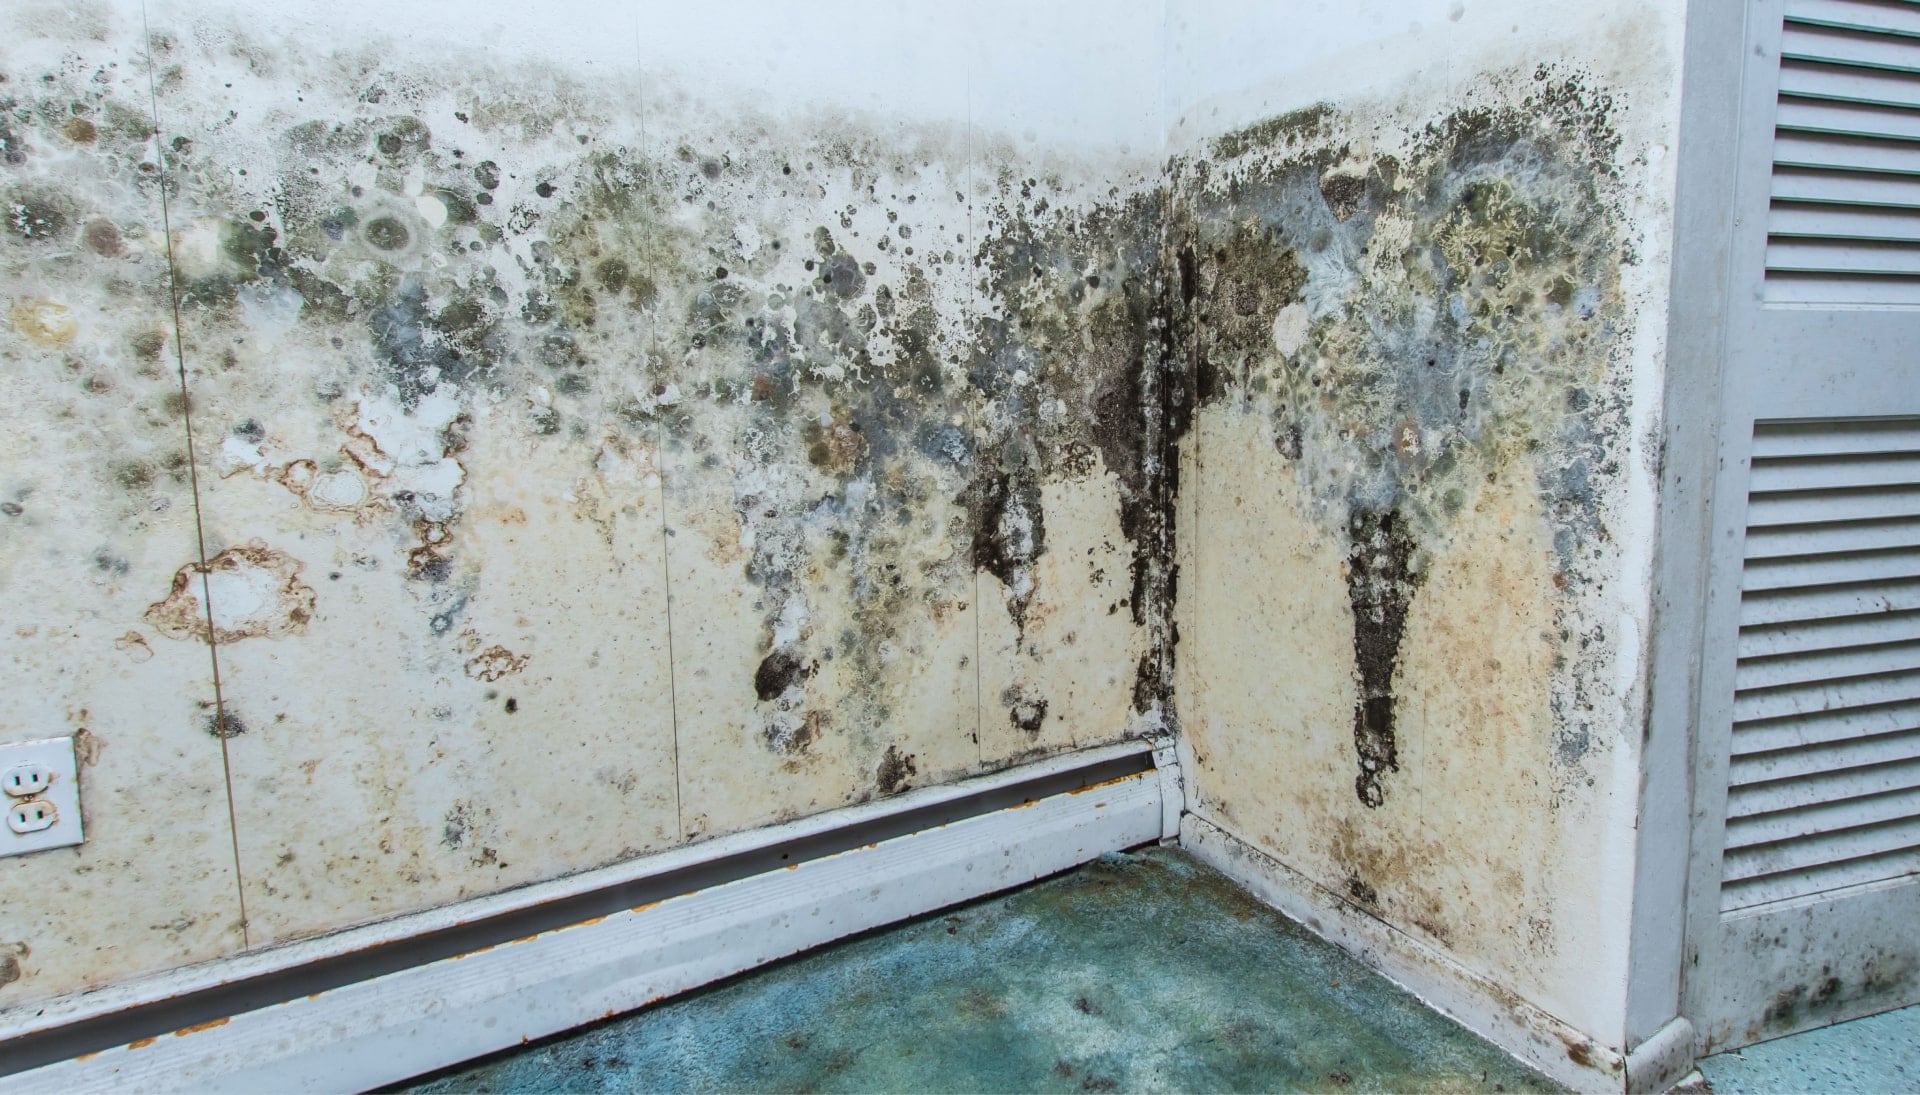 Professional mold removal, odor control, and water damage restoration service in Kansas City, Missouri.